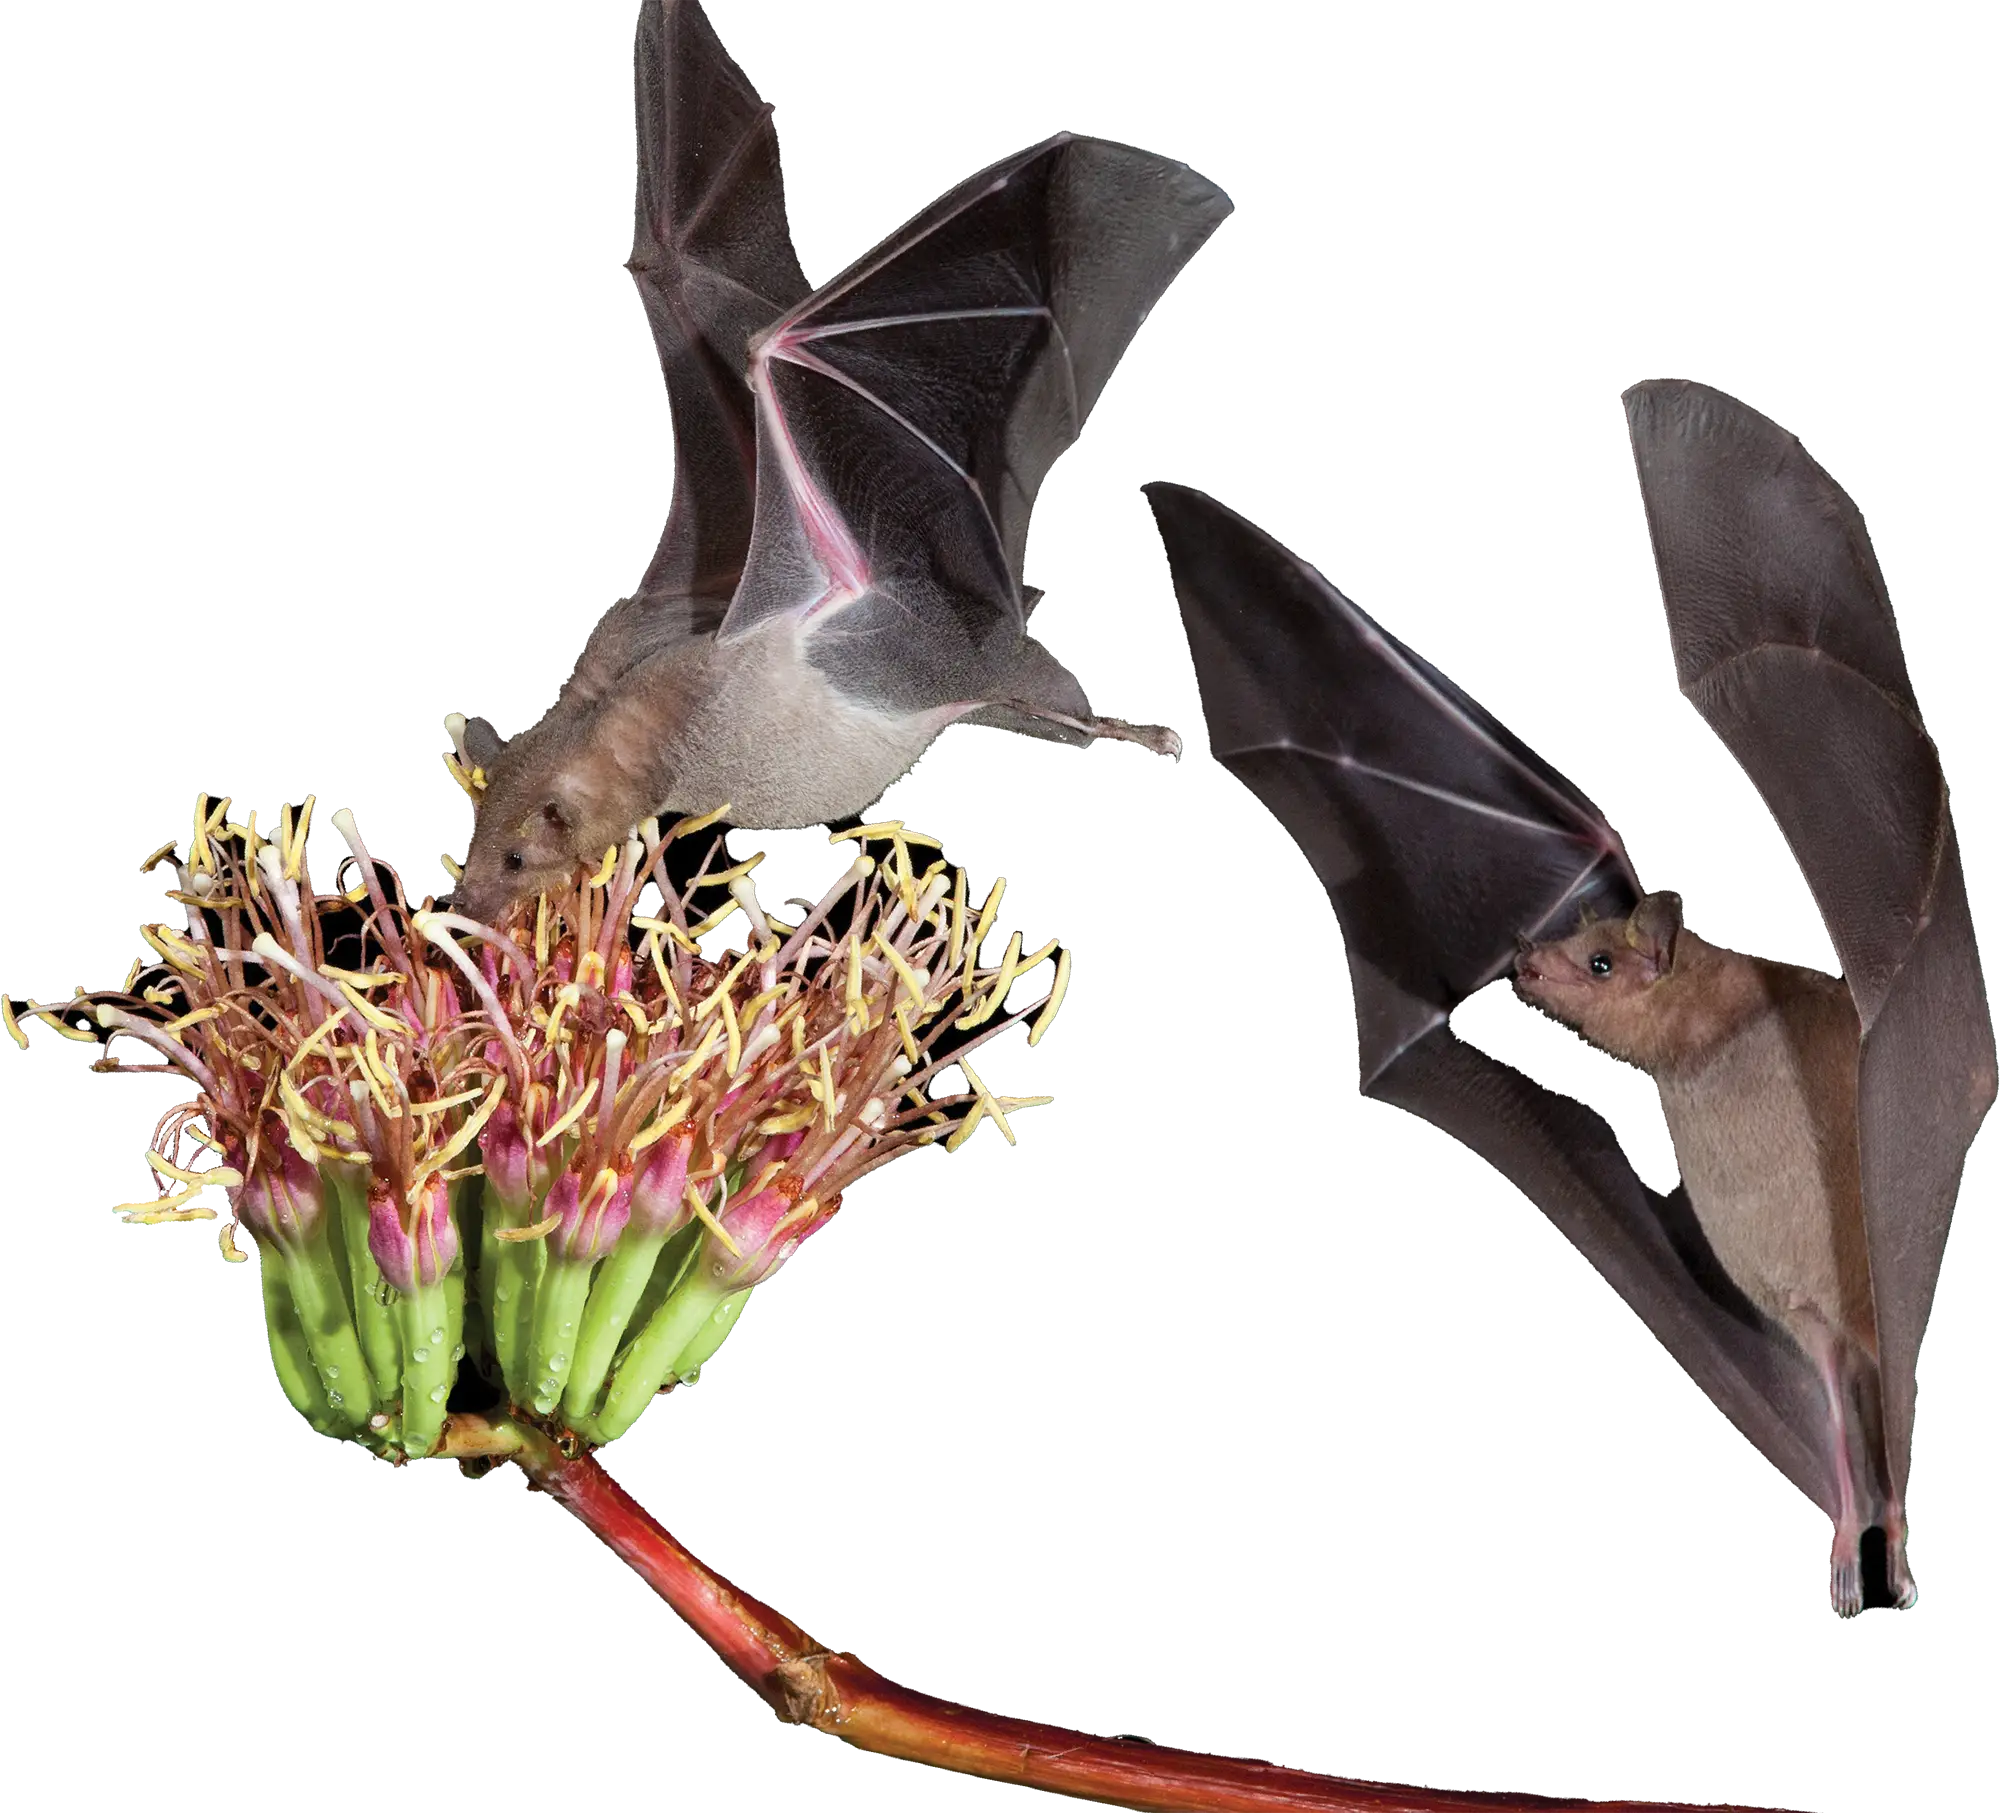 two Lesser Long-Nosed Bats approaching a flower